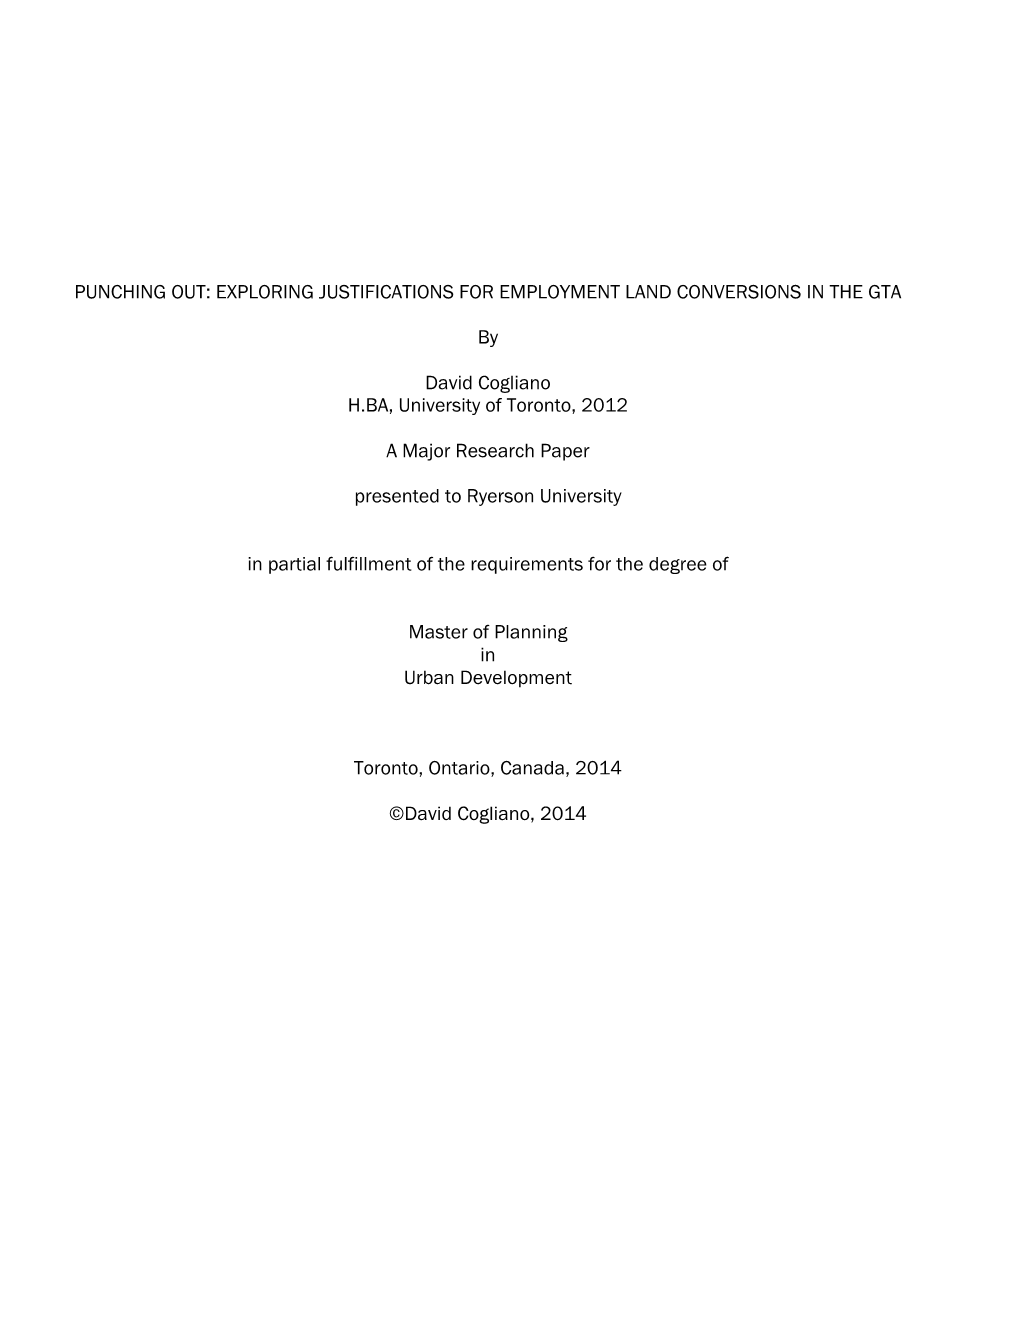 PUNCHING OUT: EXPLORING JUSTIFICATIONS for EMPLOYMENT LAND CONVERSIONS in the GTA by David Cogliano H.BA, University of Toronto